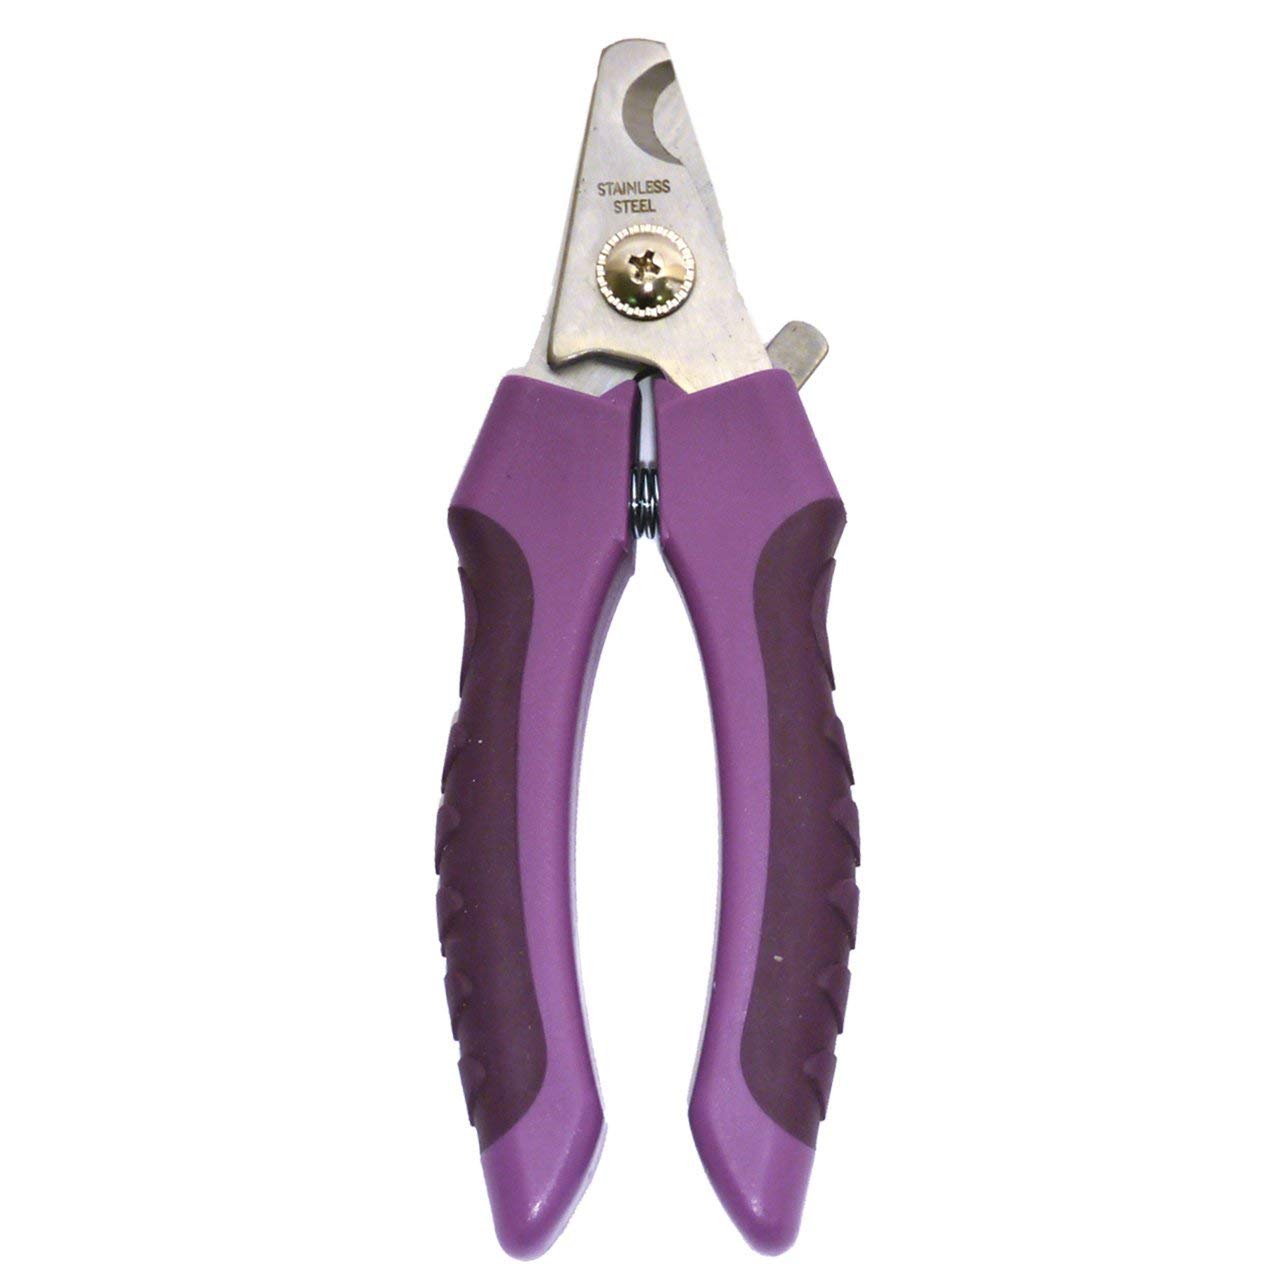 Pet Nail Clippers - Large